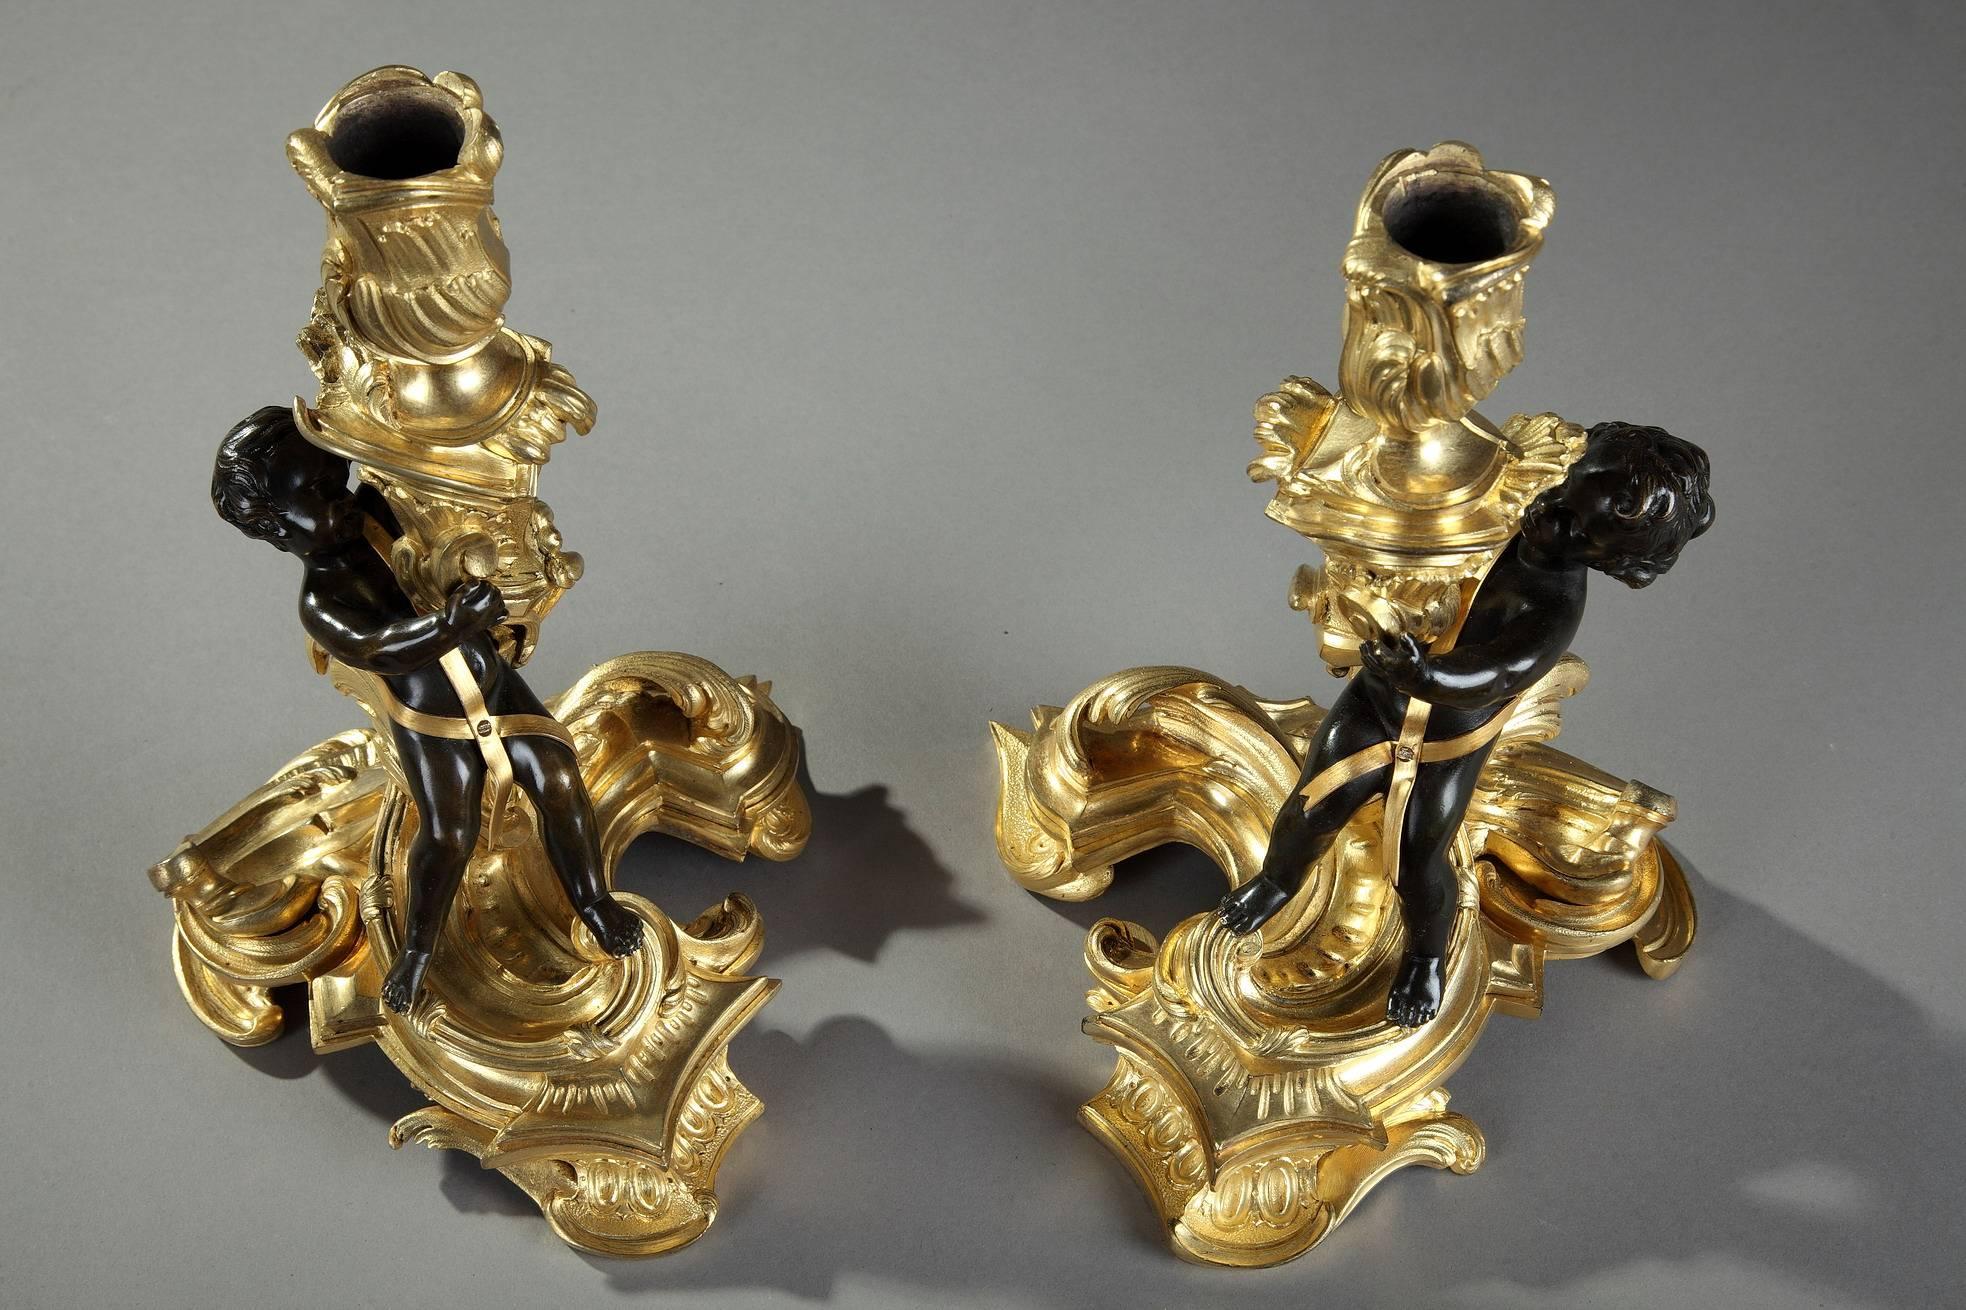 Pair of gilt and patinated bronze candlesticks in Rococo style, decorated with a putto clinging to the barrel highlighted with flowing foliage. It is resting on a circular base chiseled with ova, gadroon and scrolling foliage. The rich, profoundly